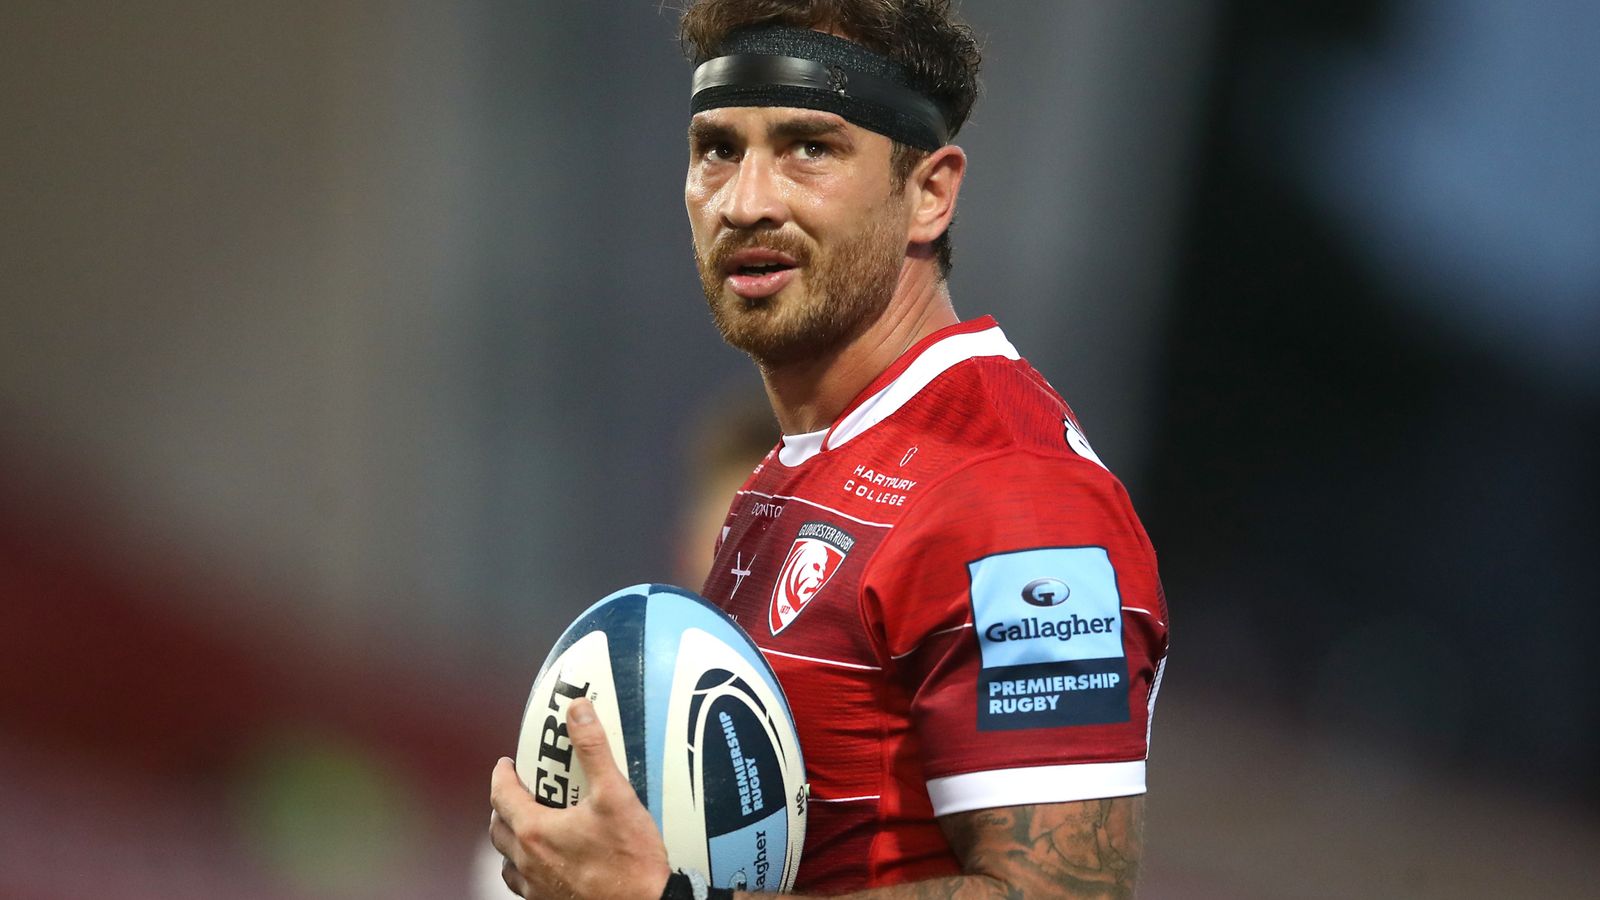 Danny Cipriani confirms retirement from rugby after realisation he "doesn't  want to play again" | Rugby Union News | Sky Sports